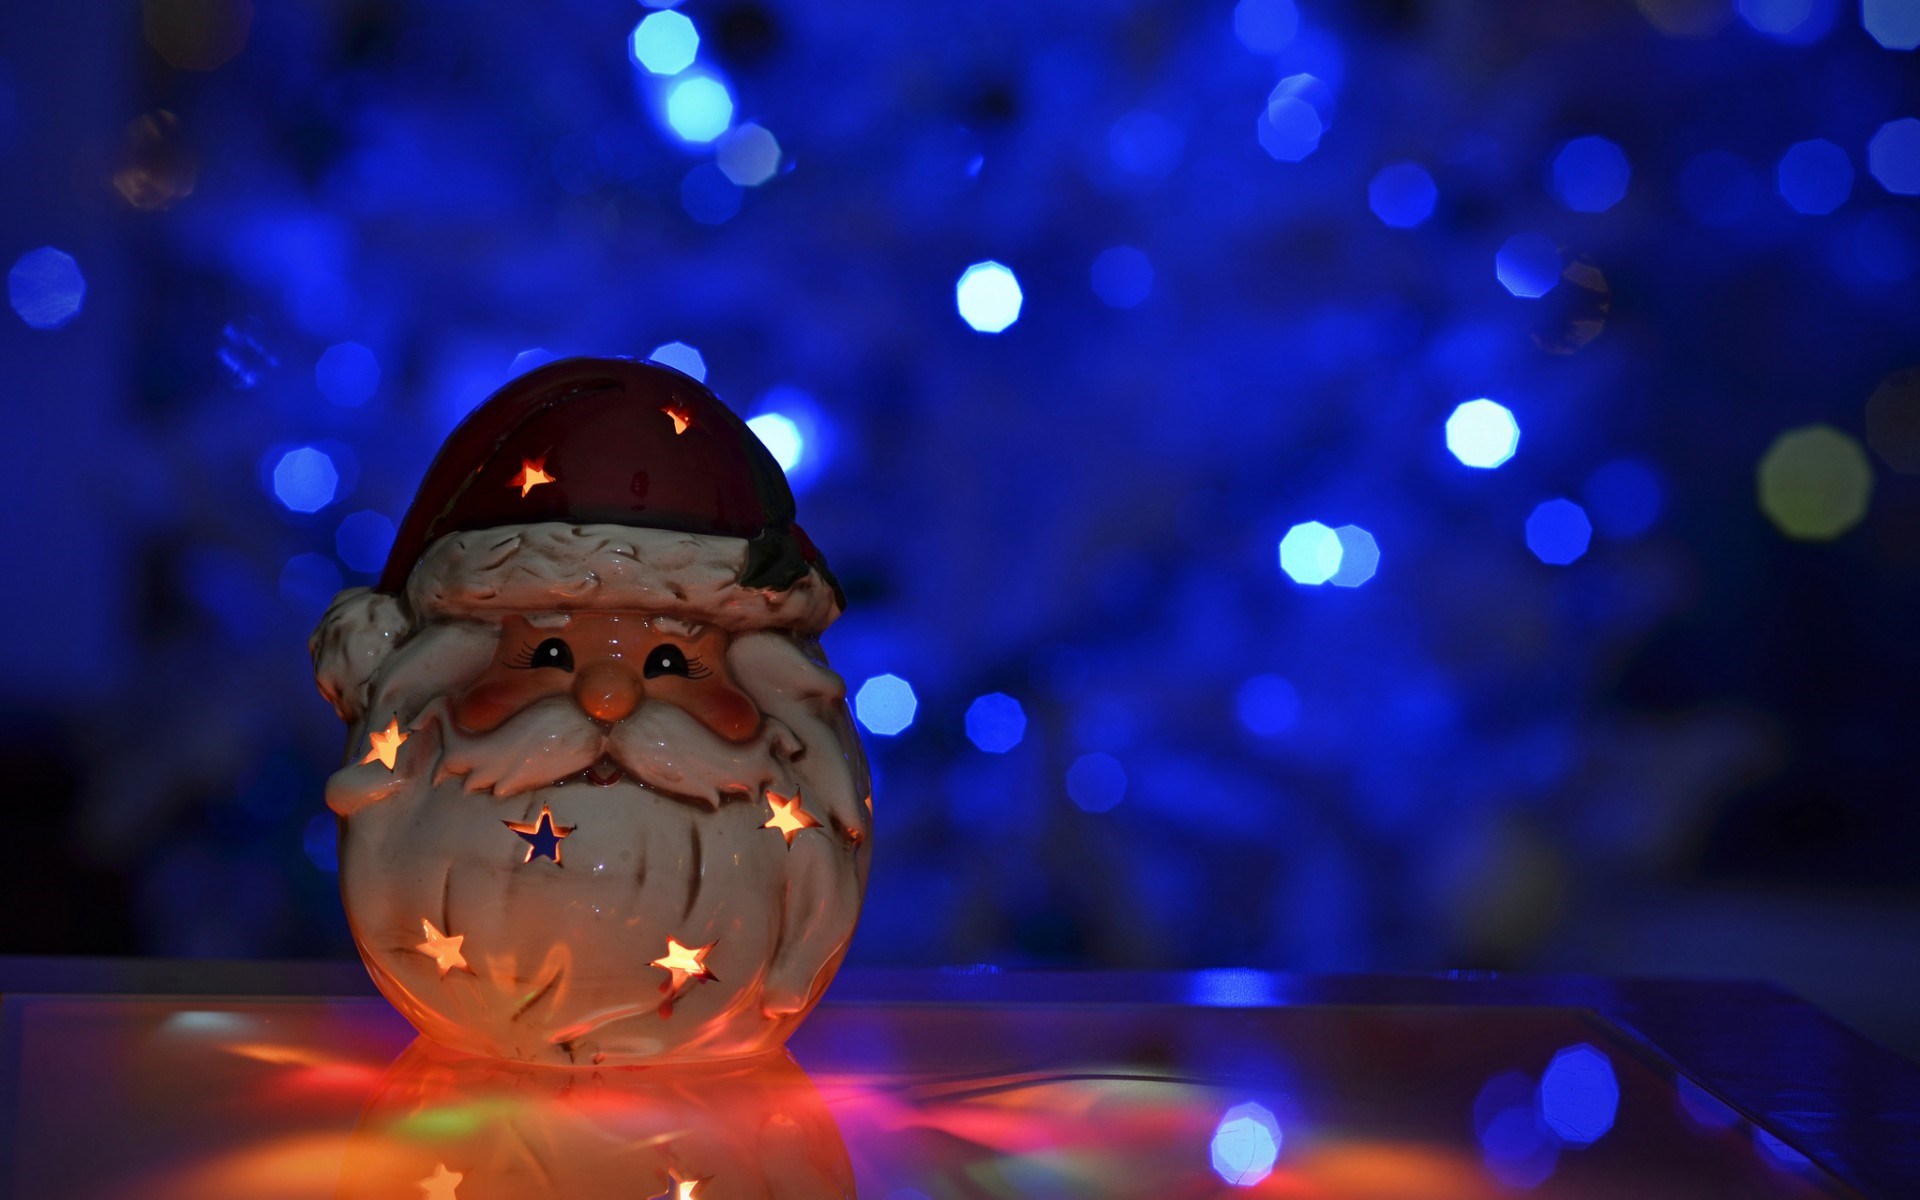 Merry Christmas HD Wallpapers, Image & Greetings [Free Download]]